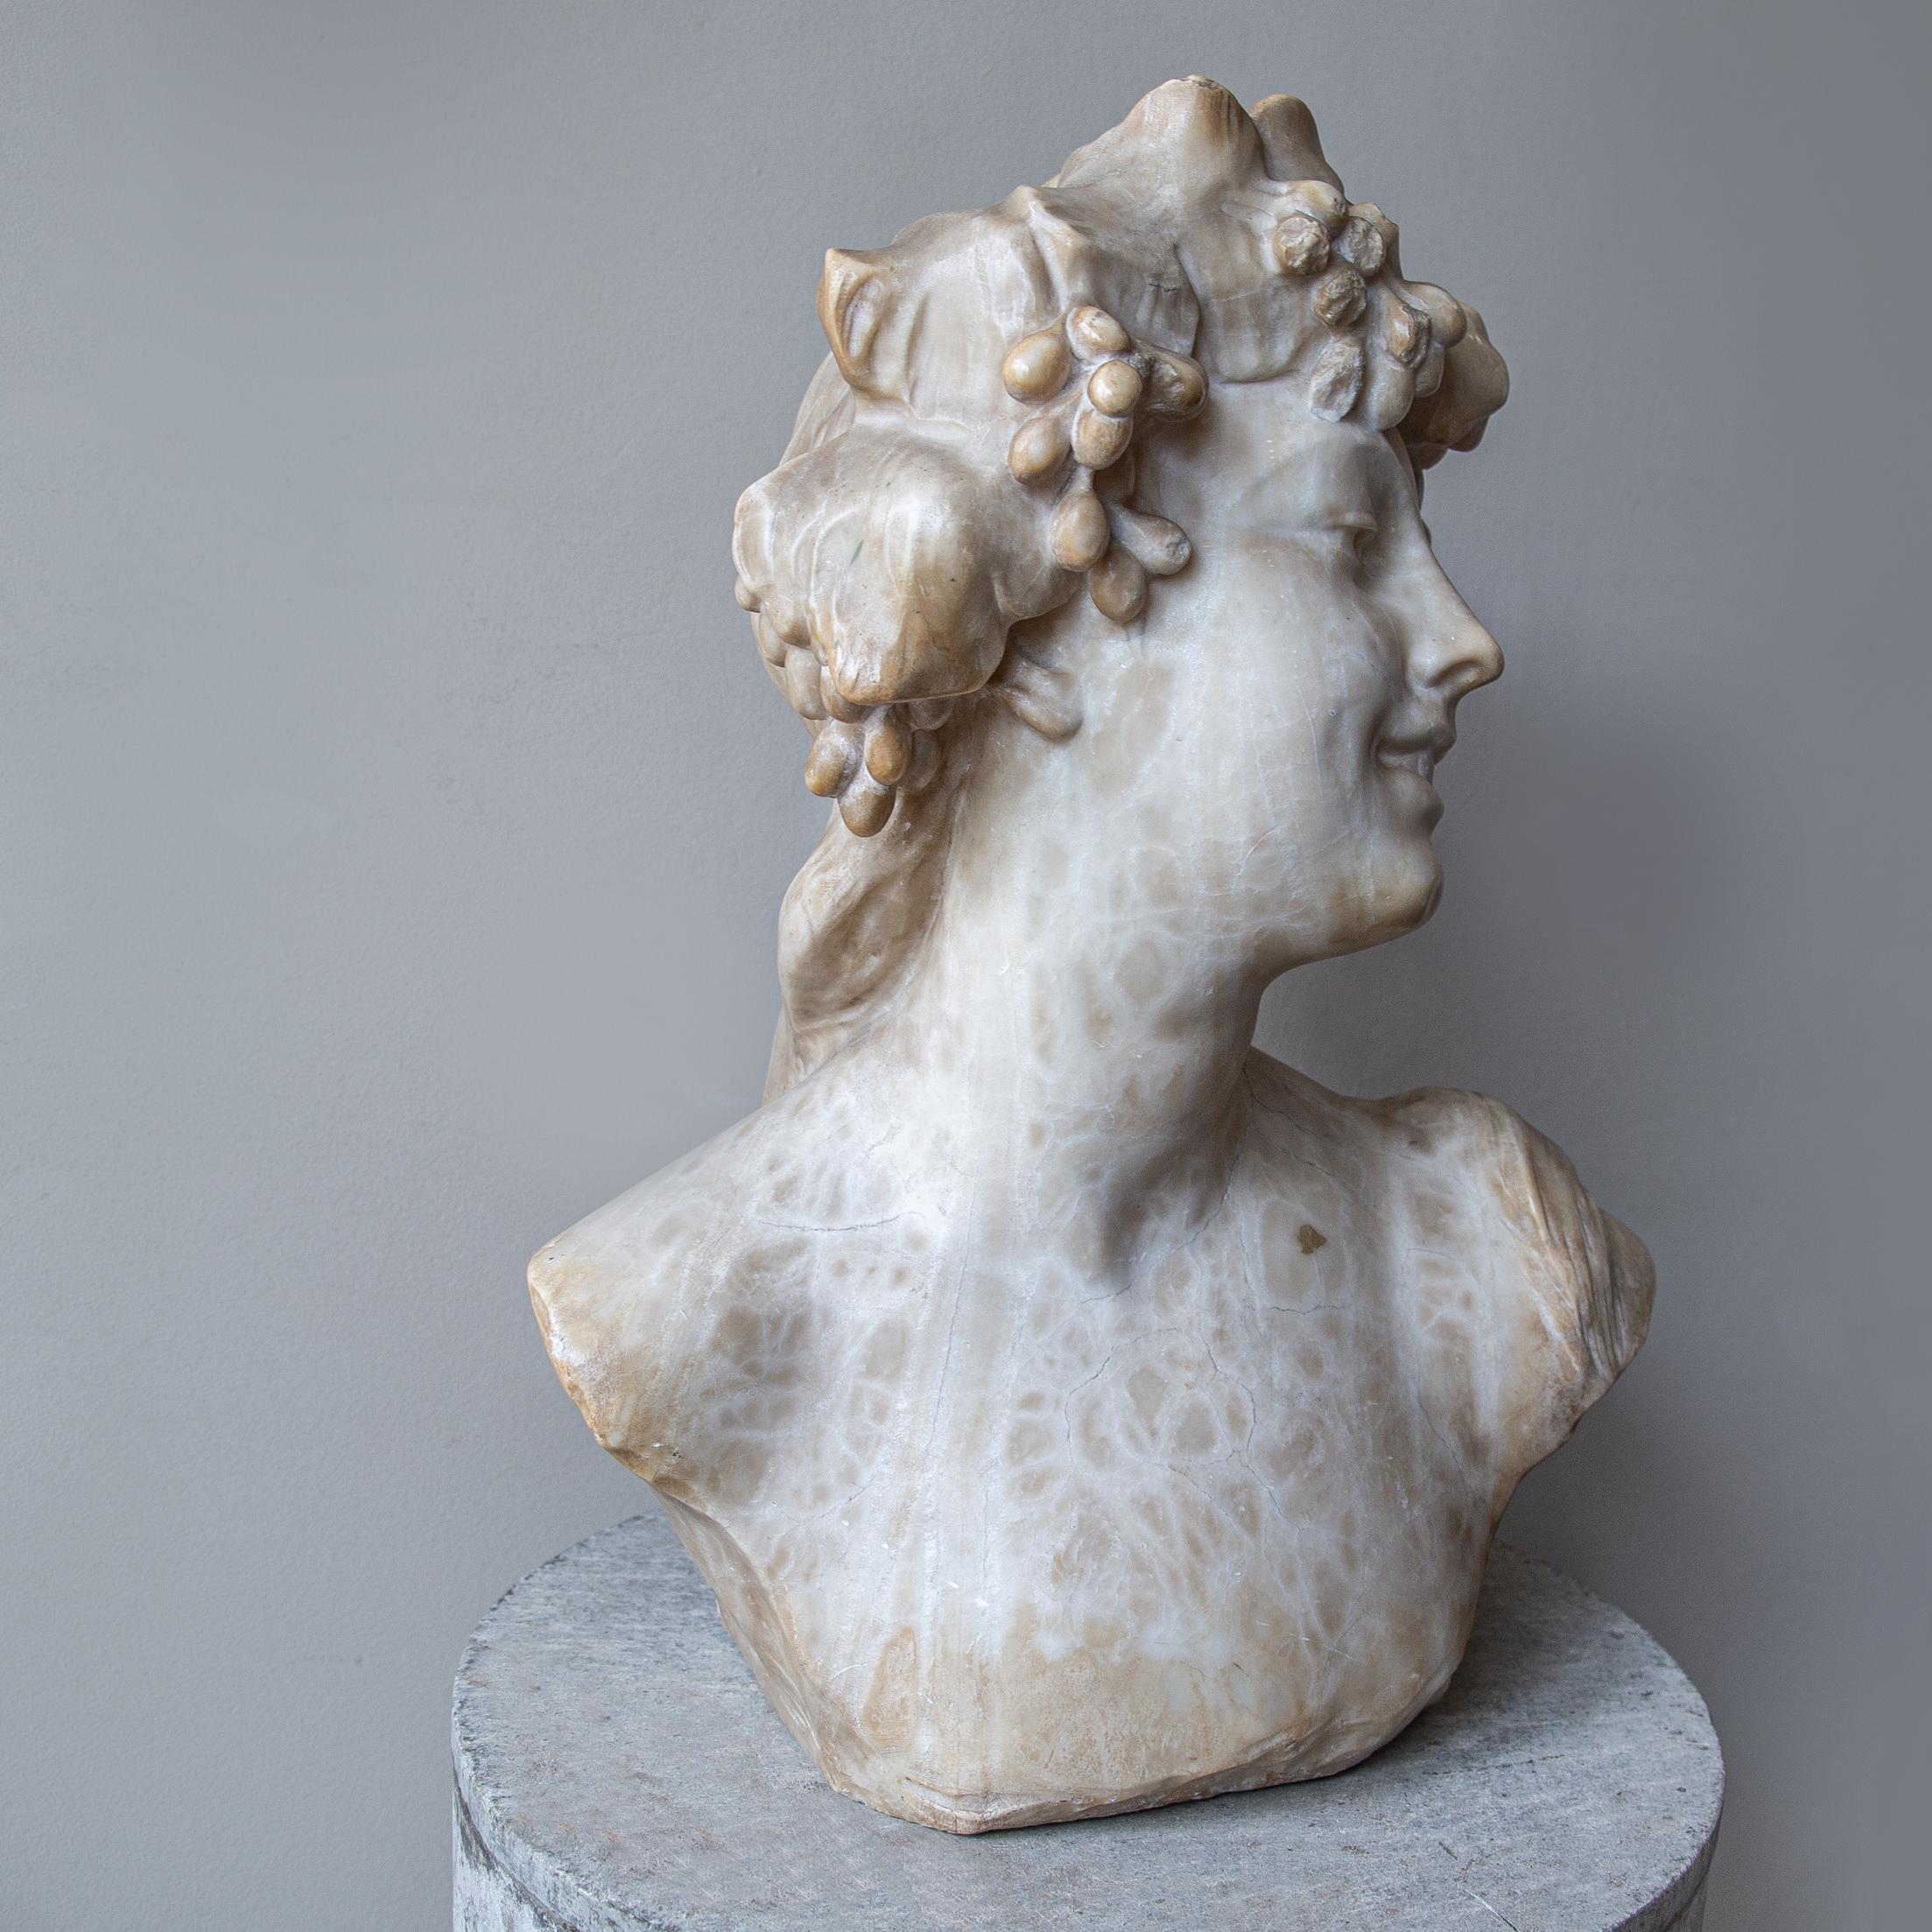 A stunning, sensual and timeless bust of a reveller of Dionysus. Of good scale proportion, beautifully hand carved out of alabaster and now showing an incredible aged patination. 

Jef Lambeaux (1852-1908) was a leading Belgian figurative sculptor